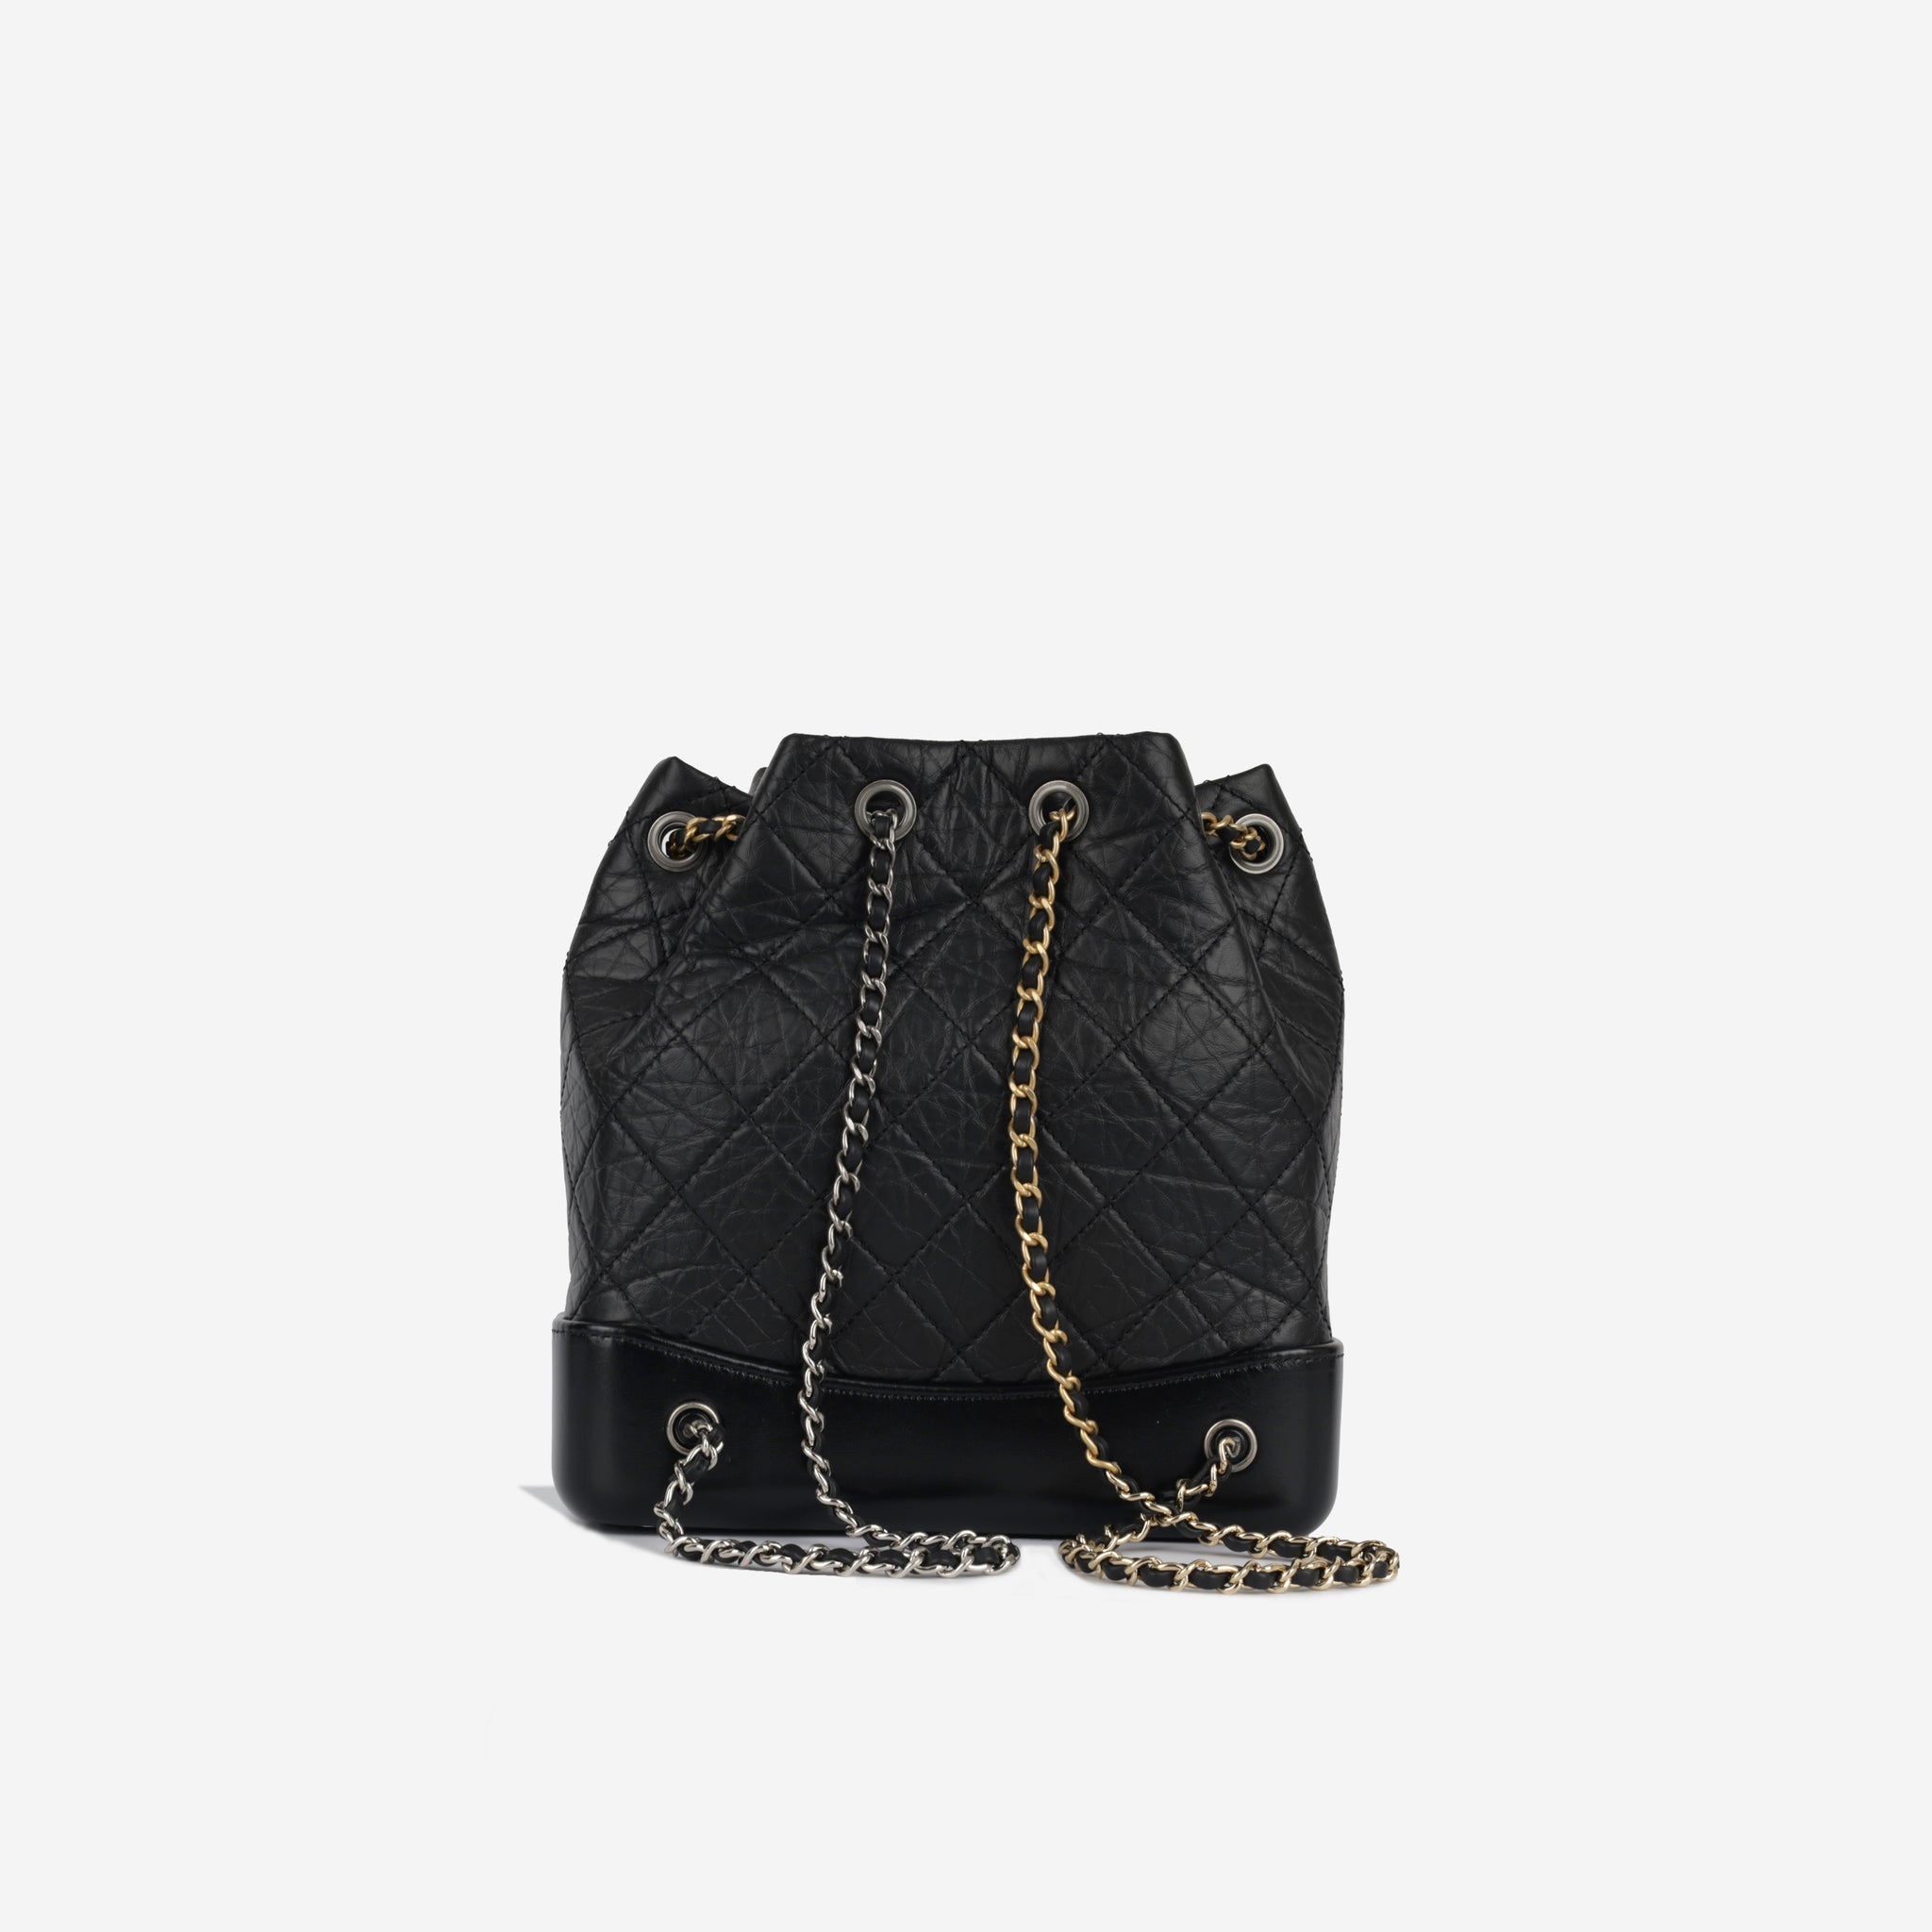 Chanel - Small Gabrielle Backpack - Black Aged Calfskin MHW